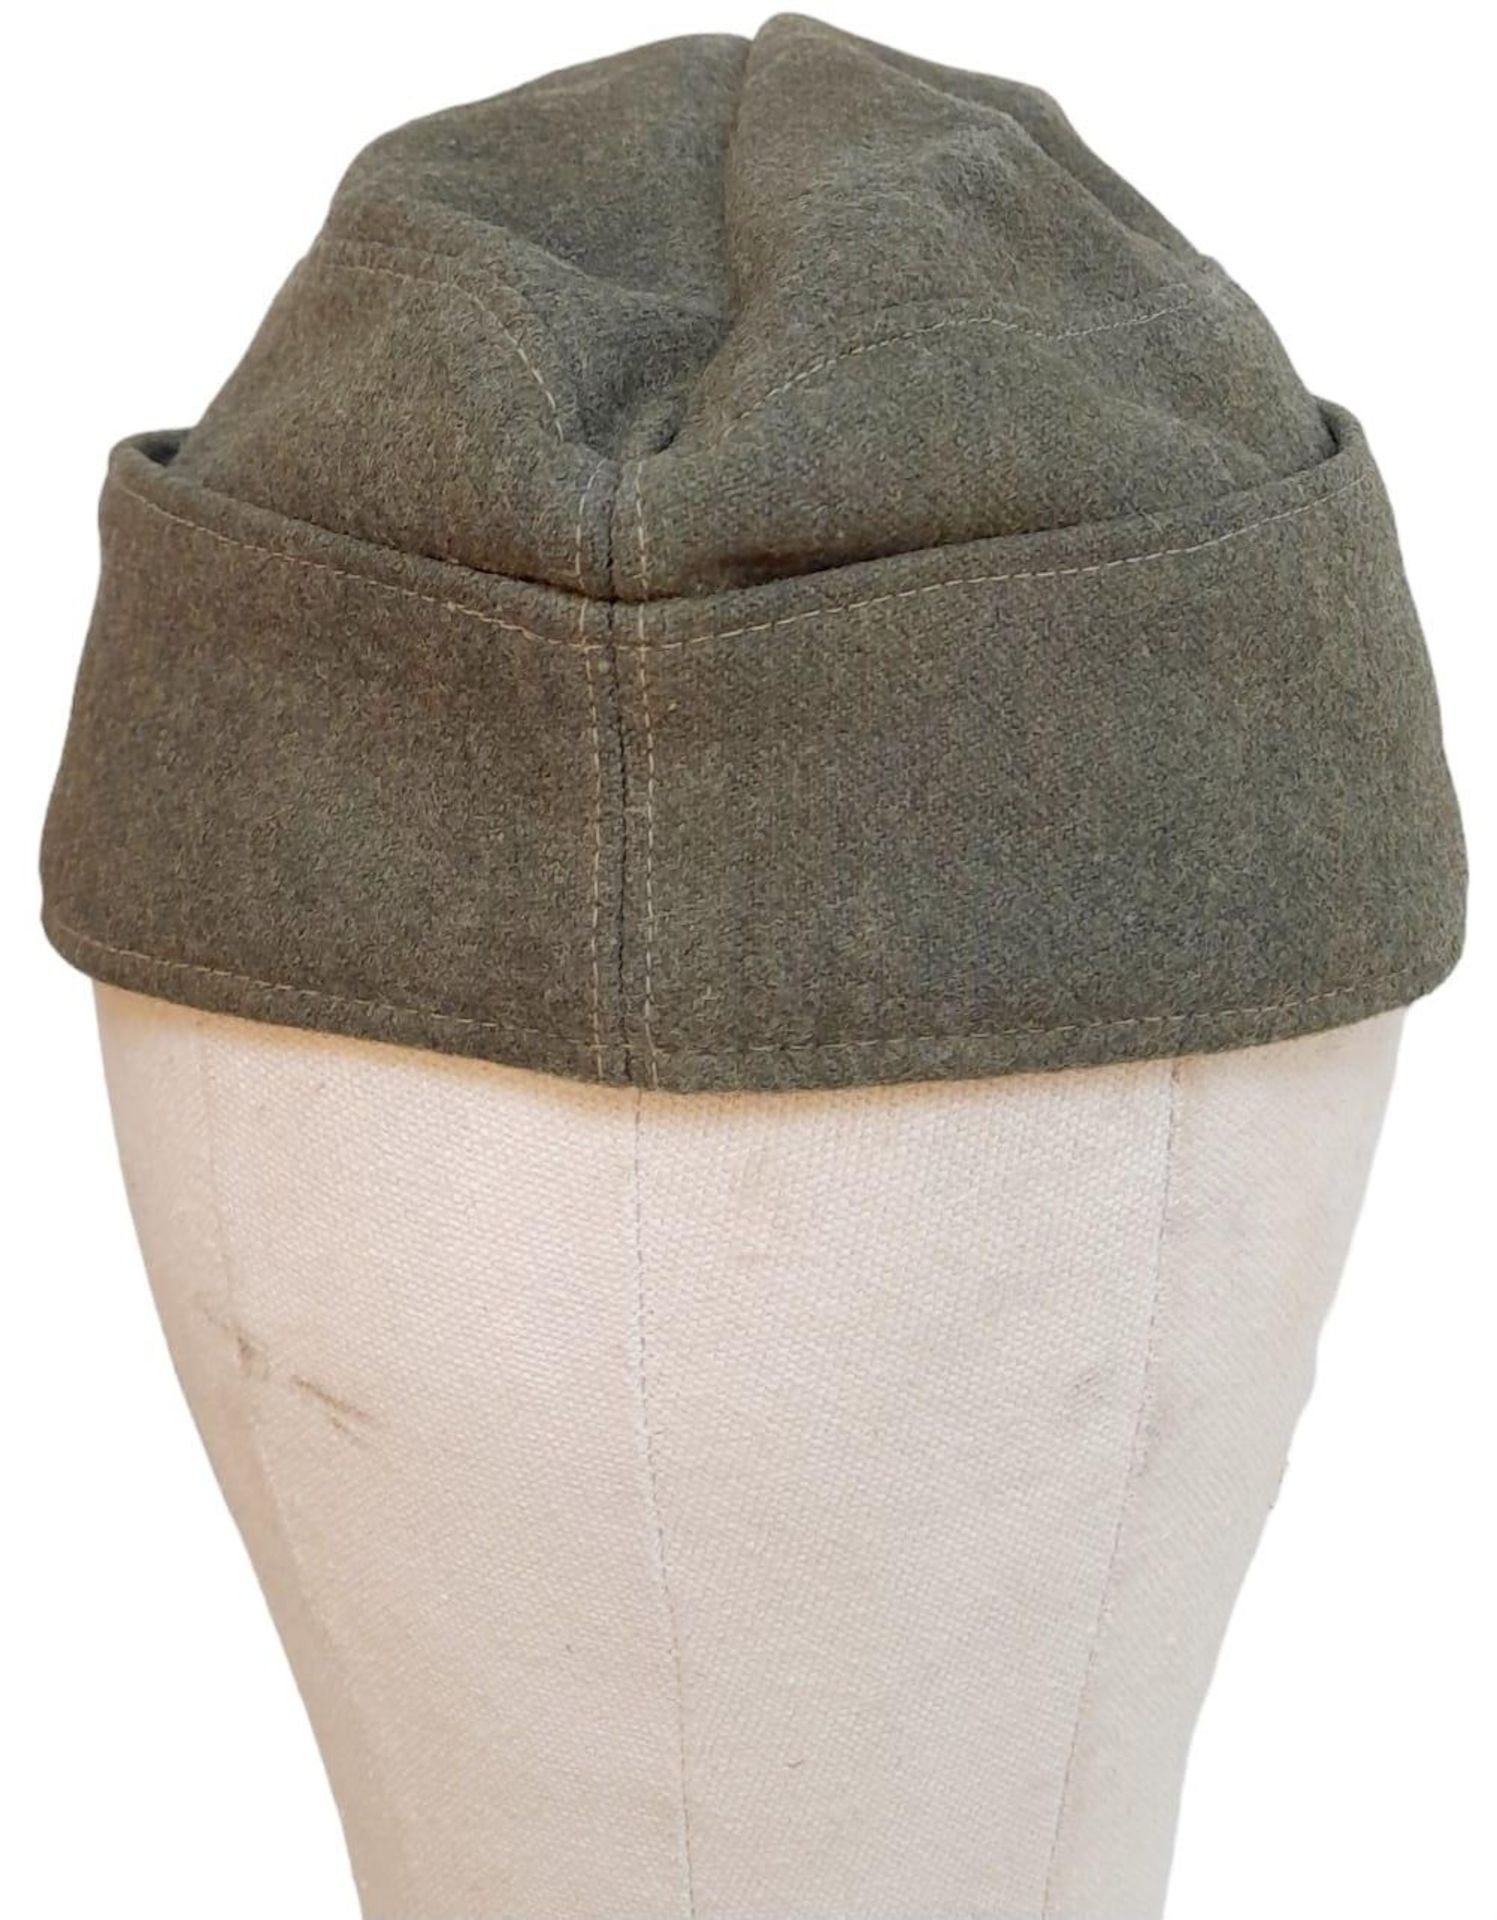 3rd Reich M34 Army Overseas Cap. Made by Schubt, Berlin. Super condition for its age - Bild 3 aus 4